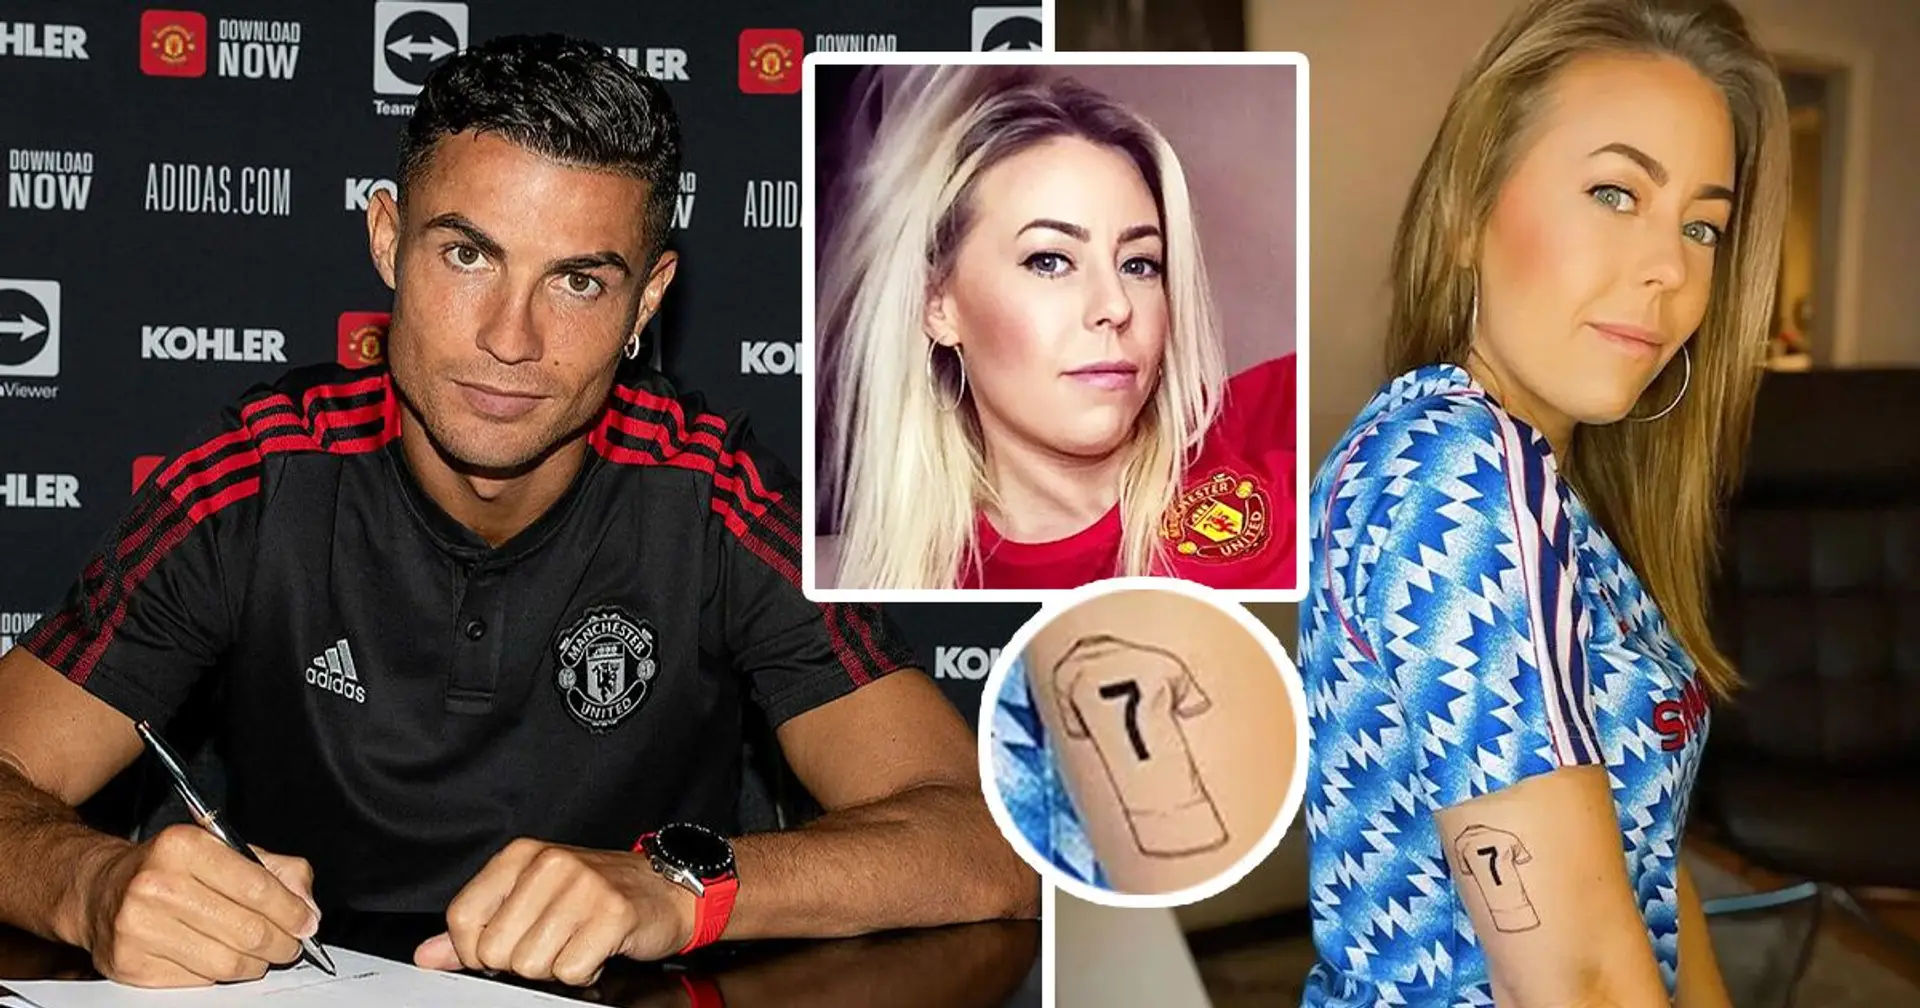 ‘I got a special tattoo when Ronaldo signed for Man United’: Fan being mocked over Cristiano Ronaldo tattoo, she says it was a big mistake